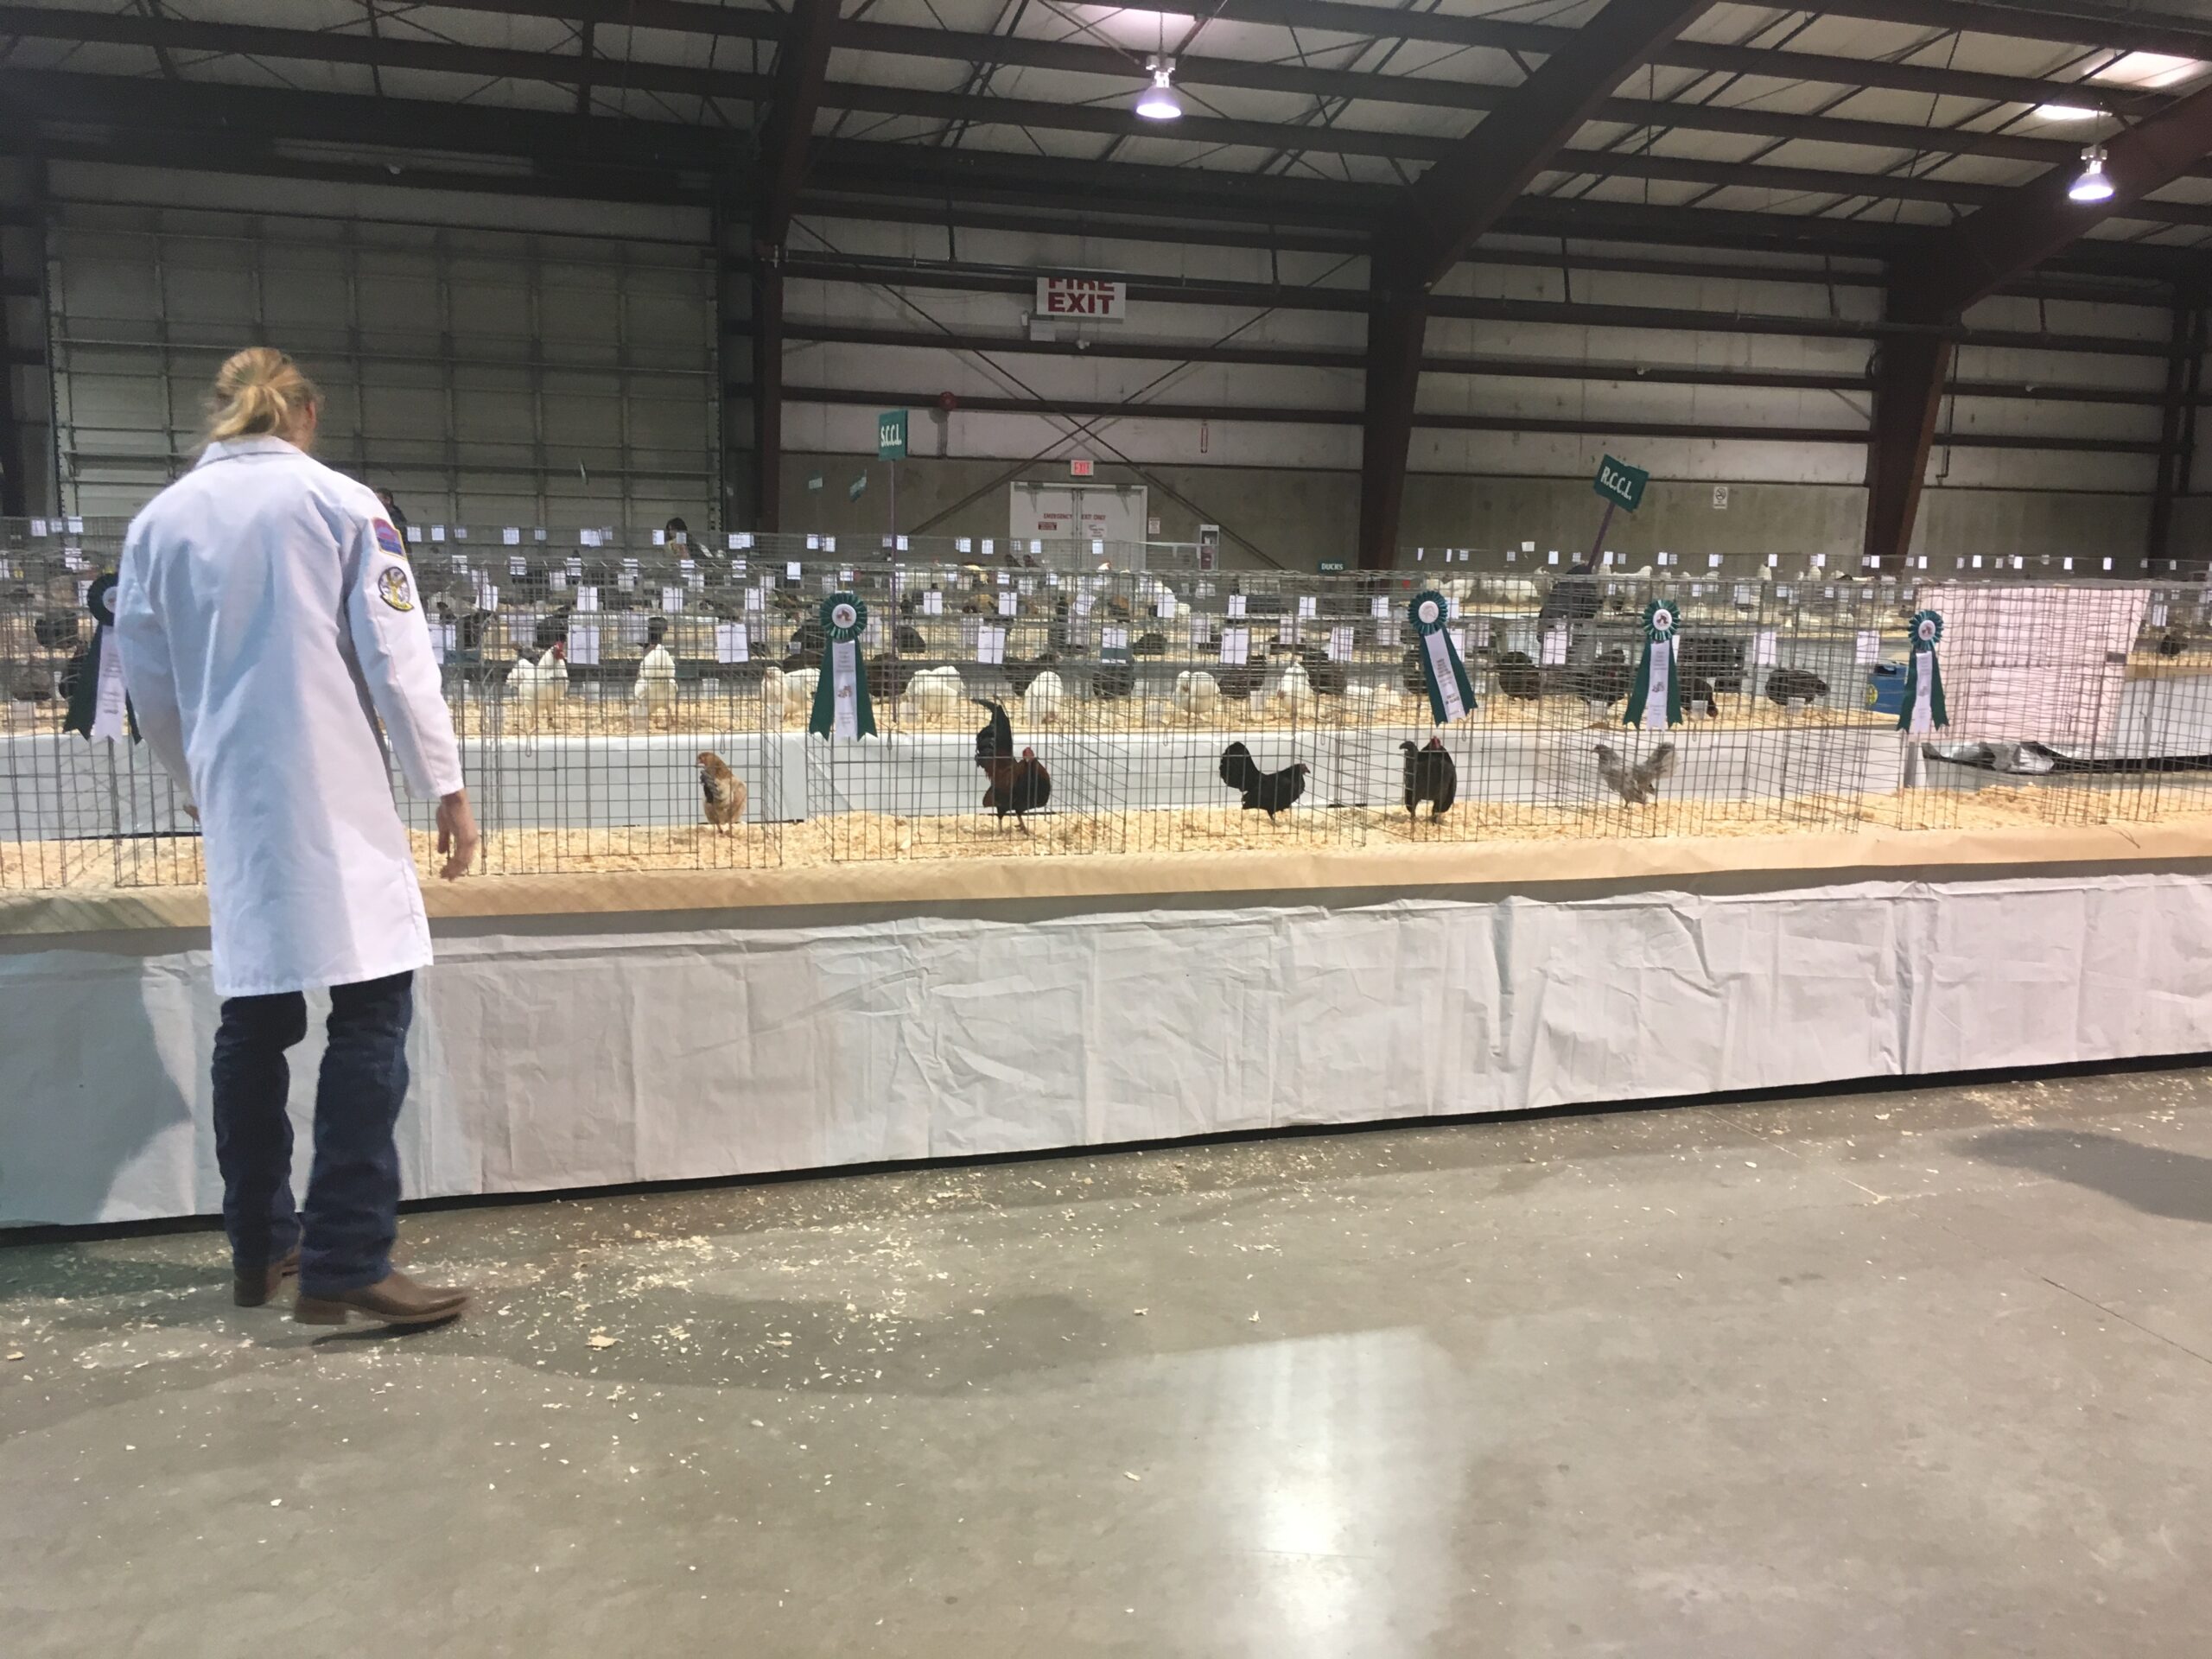 poultry experience, judging